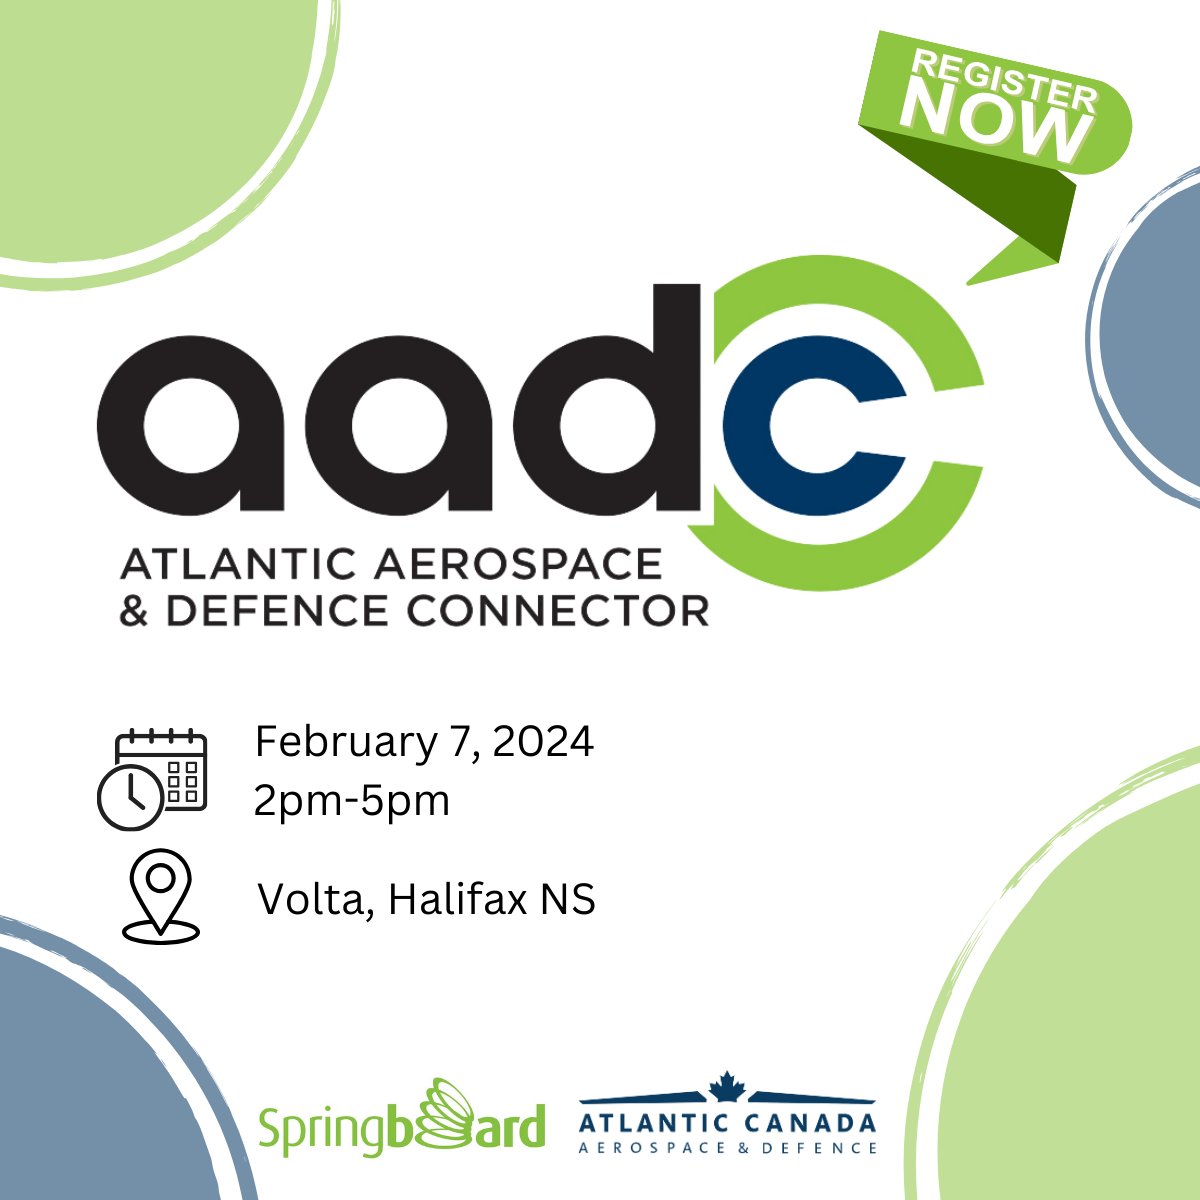 Registration is open for our upcoming Atlantic Aerospace & Defence Connector in partnership with @SBAtlantic 👏 📅 February 7 from 2pm-5pm 📍 Volta (1800 Argyle St.), Halifax NS 💲 FREE Register here: eventbrite.ca/e/2024-atlanti…